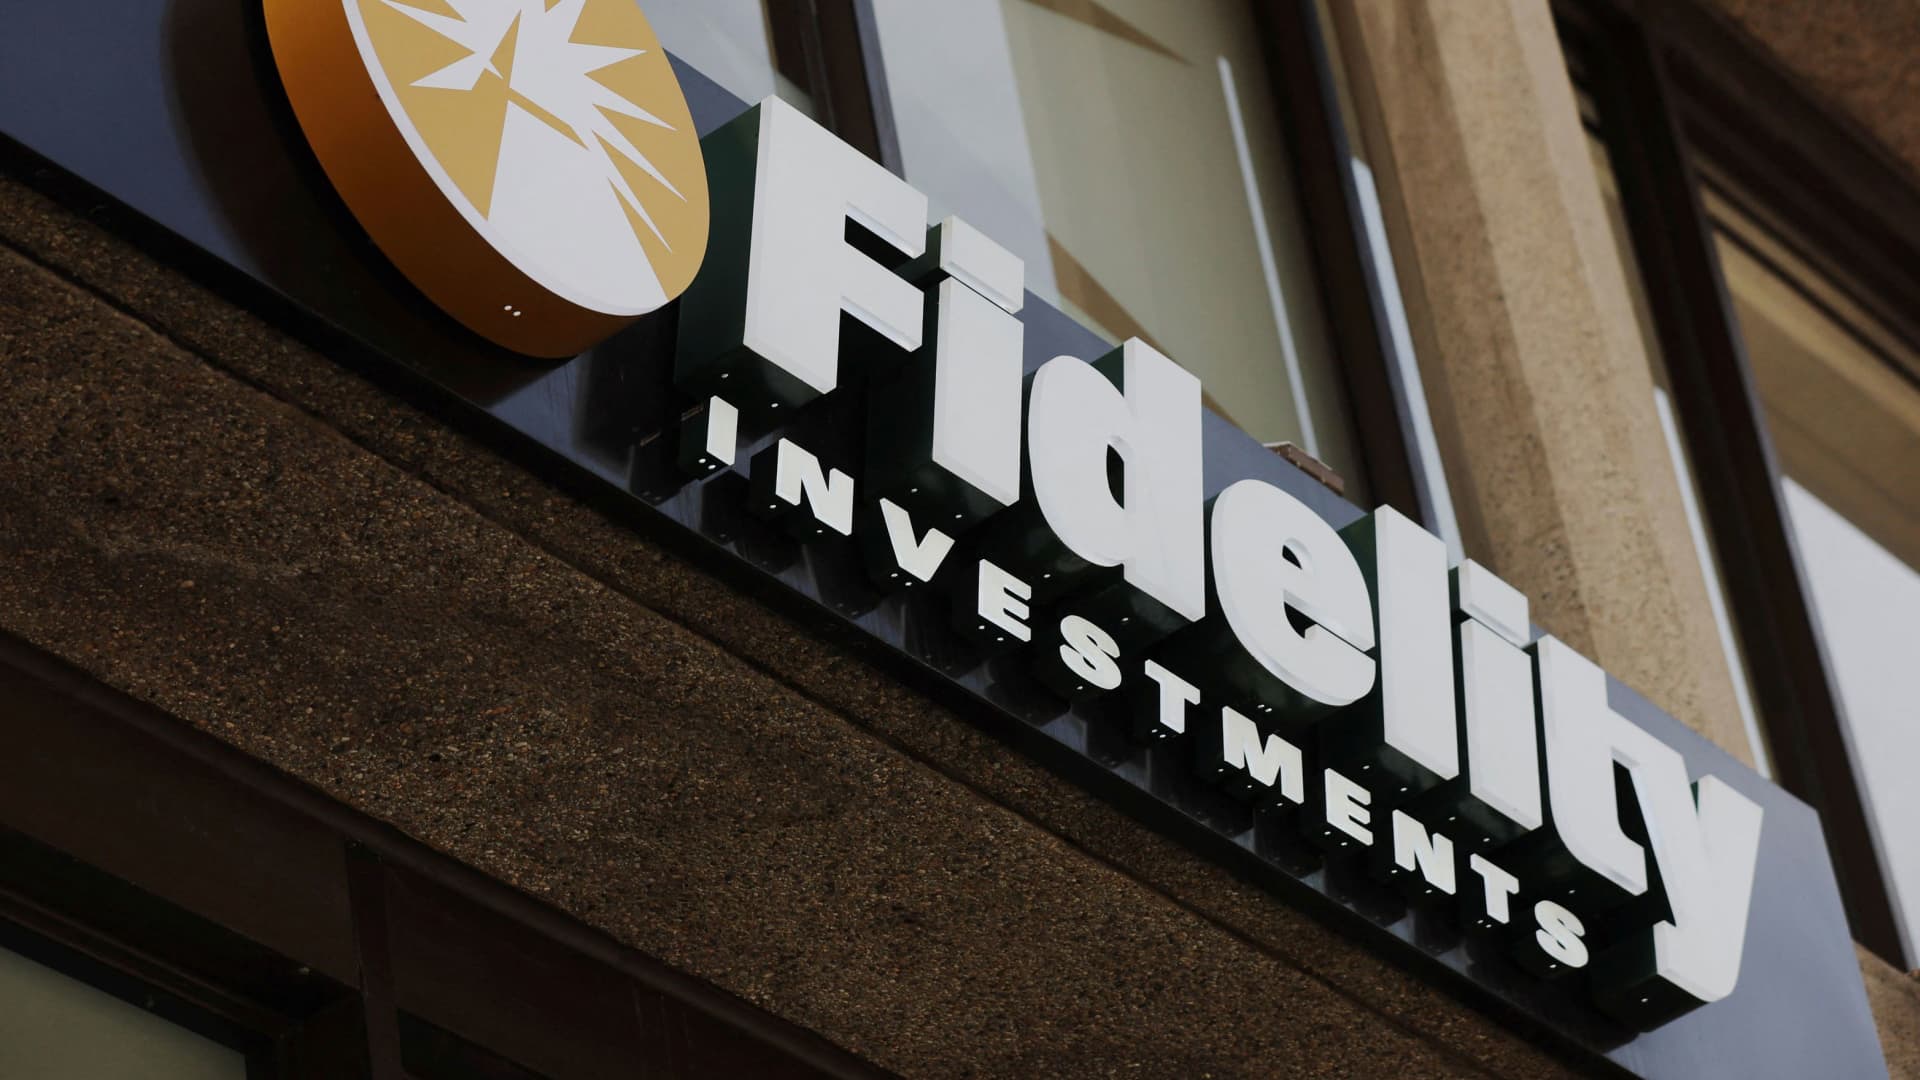 Fidelity is the latest employer to offer free college education to workers